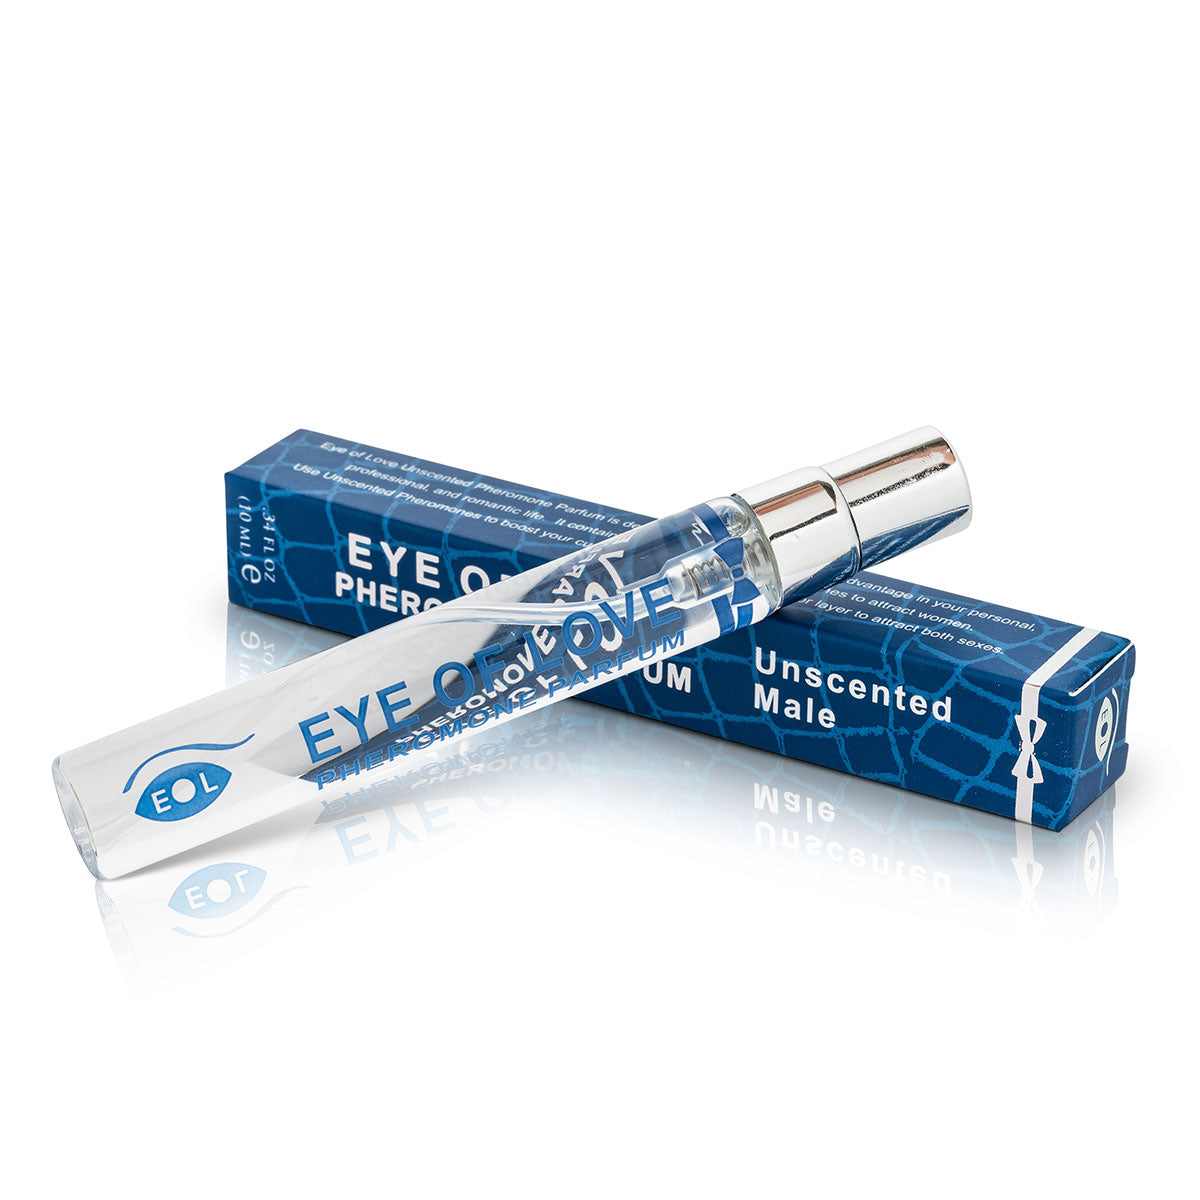 Eye of Love Pheromone Parfum 10ml  Unscented Male (M to F) Intimates Adult Boutique